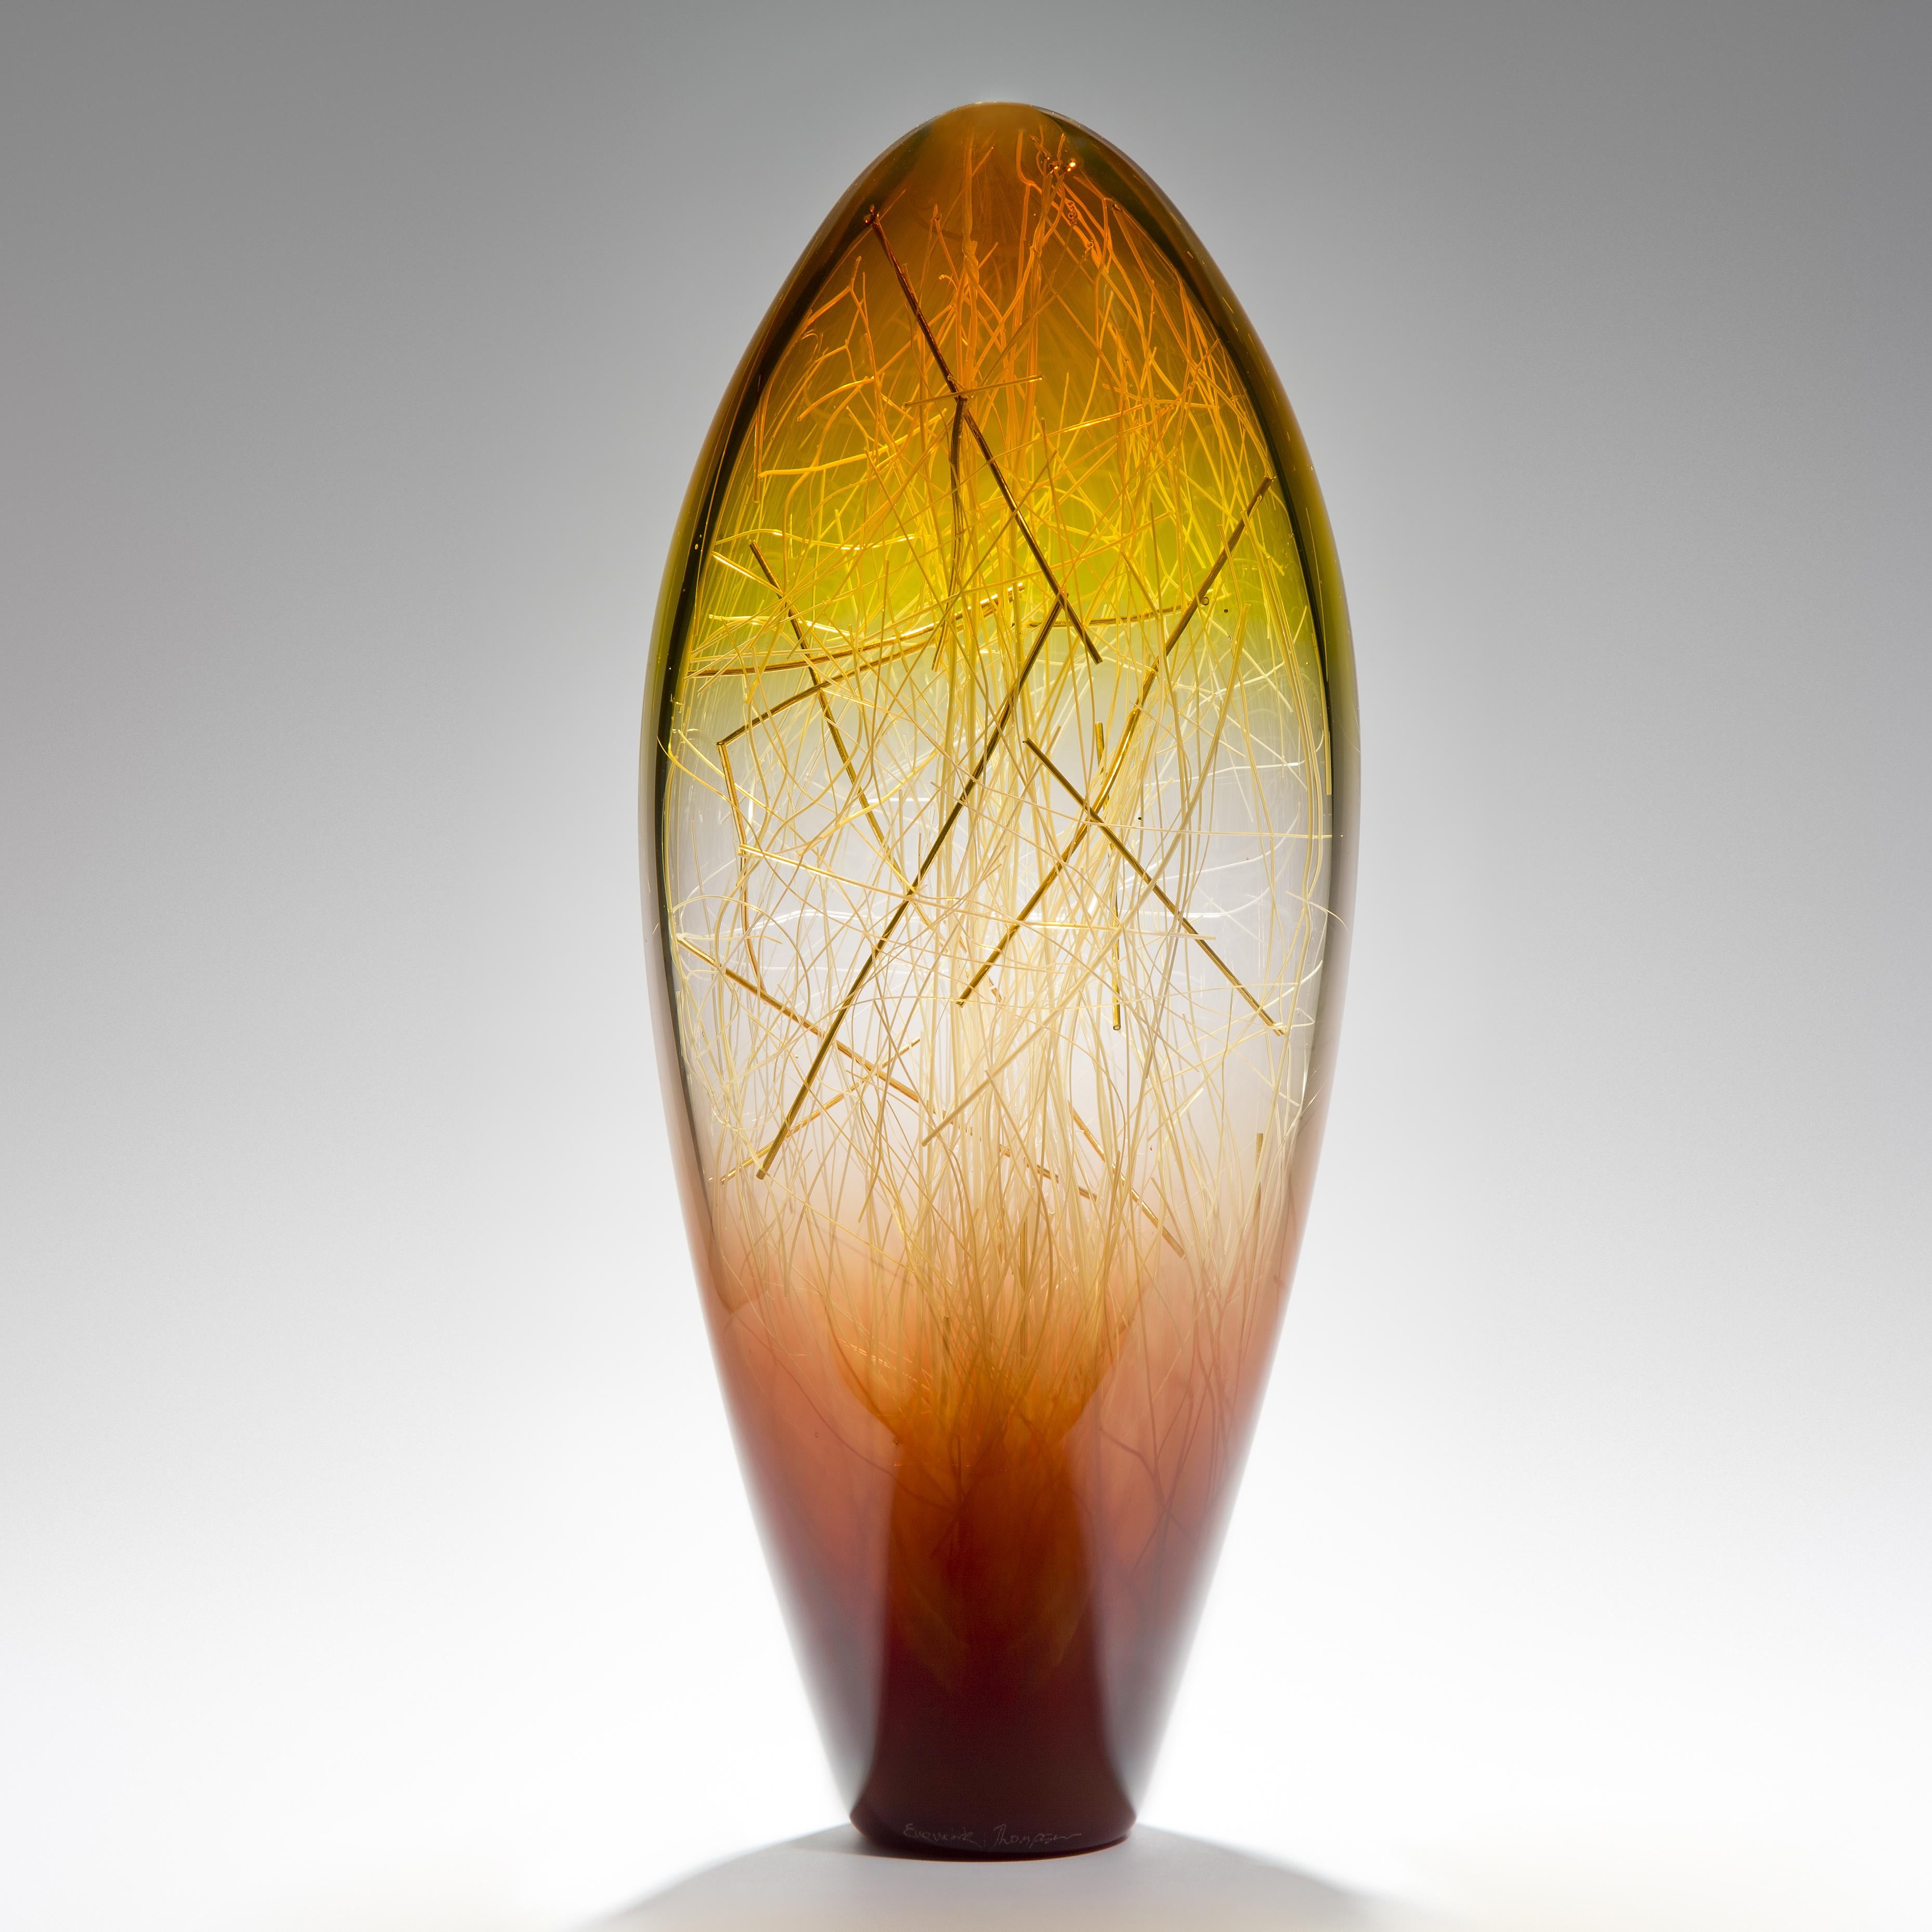 Ore in Amber and Coffee is a unique glass sculpture in amber, coffee and clear coloured glass by the collaborative artists Hanne Enemark (Danish) and Louis Thompson (British). The outer glass form contains a multitude of Fine white canes of glass,